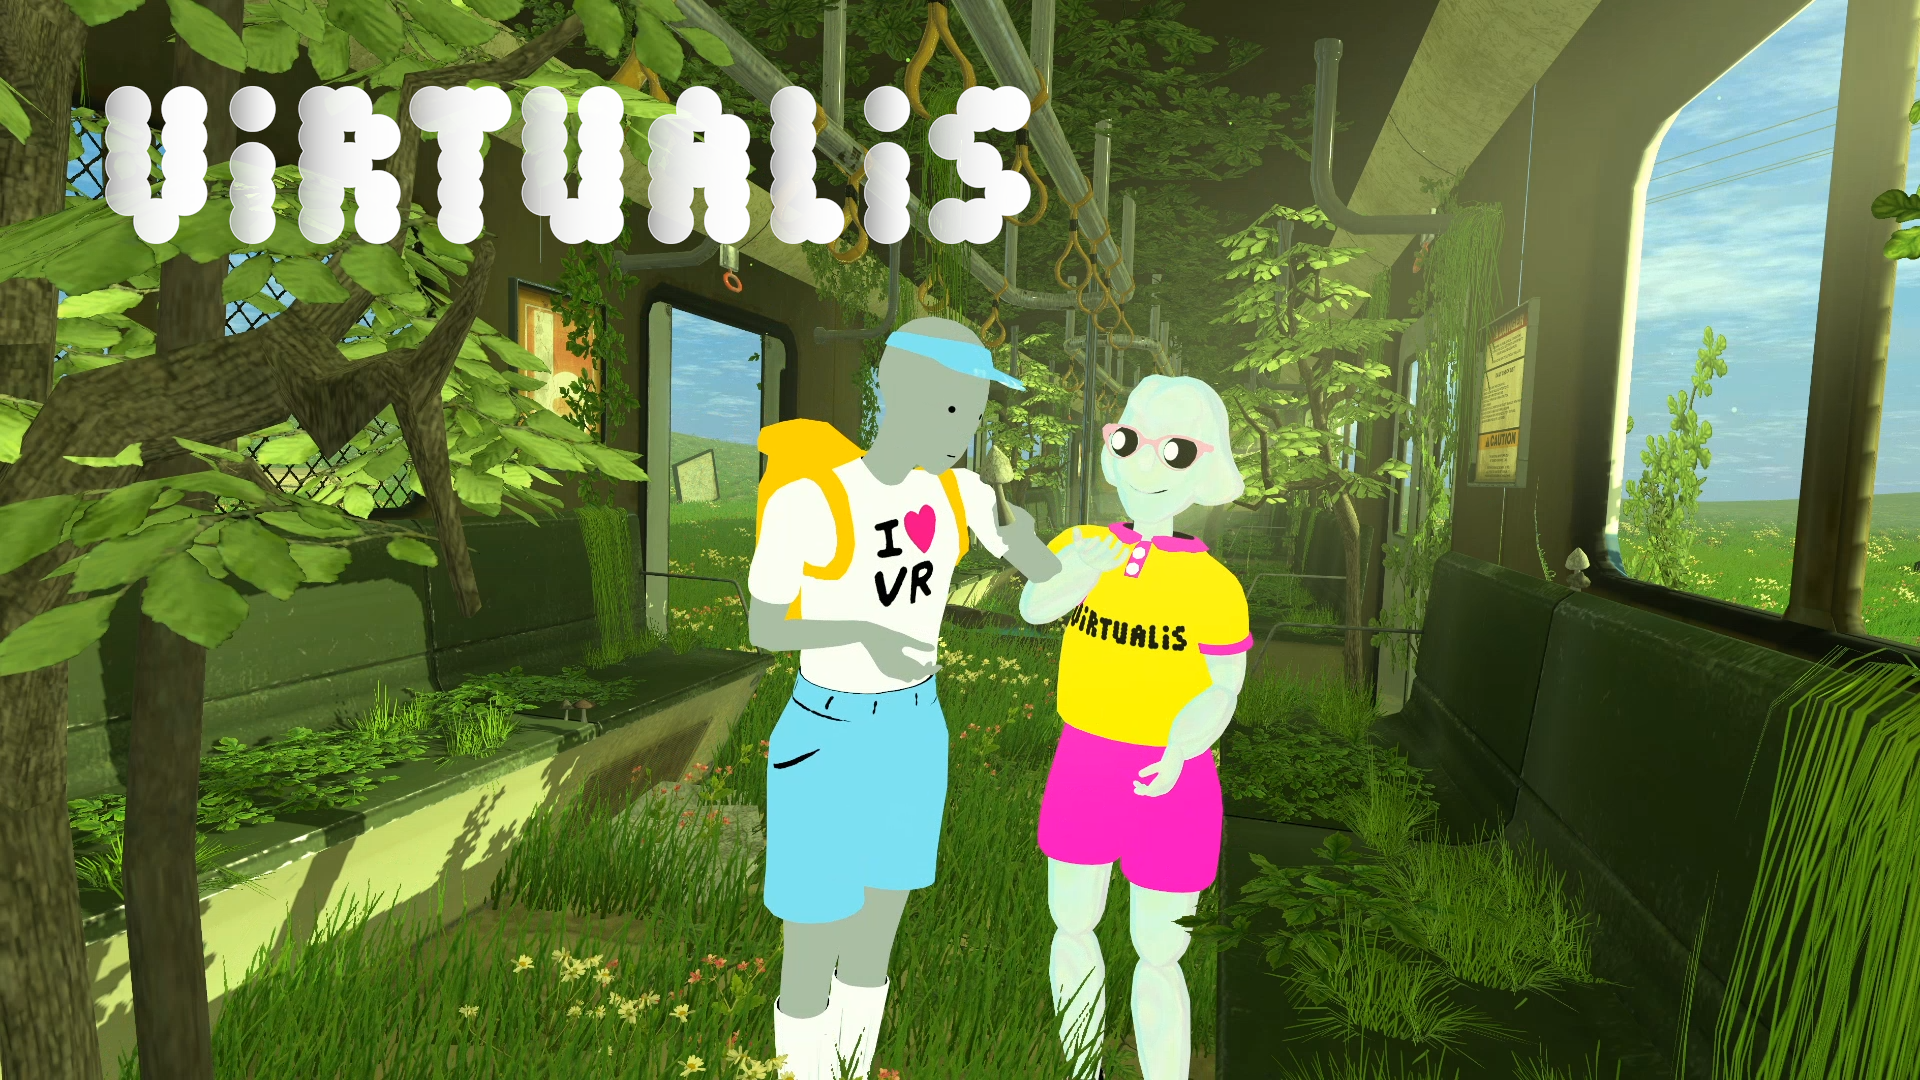 Image of two virtual people talking to one another against a green background.